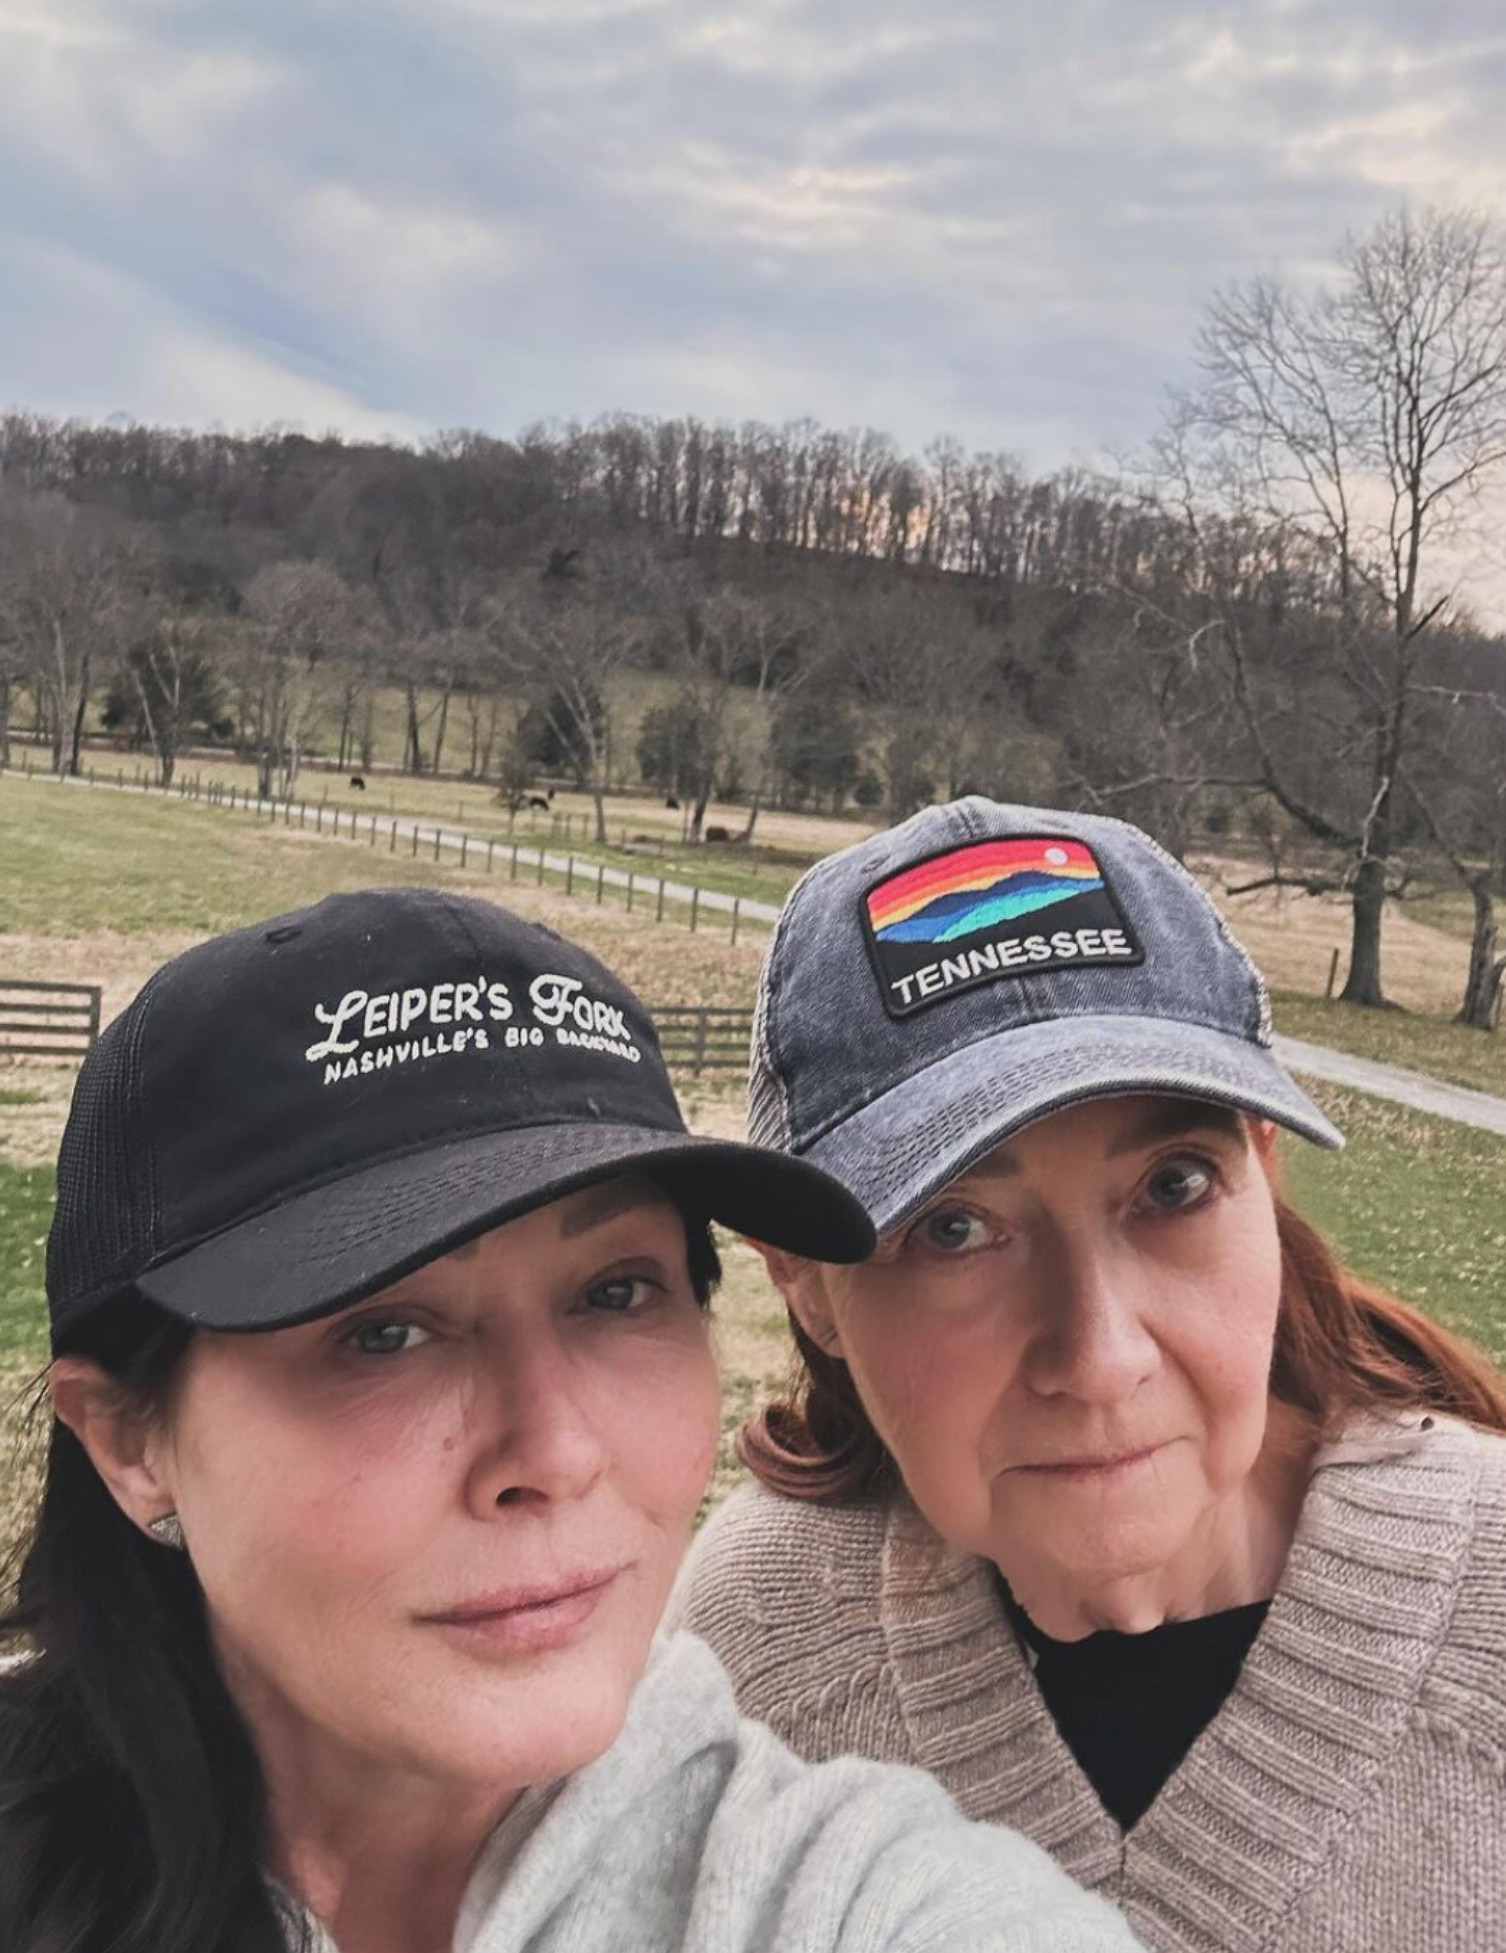 Shannon Doherty with her mother. Photo: @theshando/Instagram